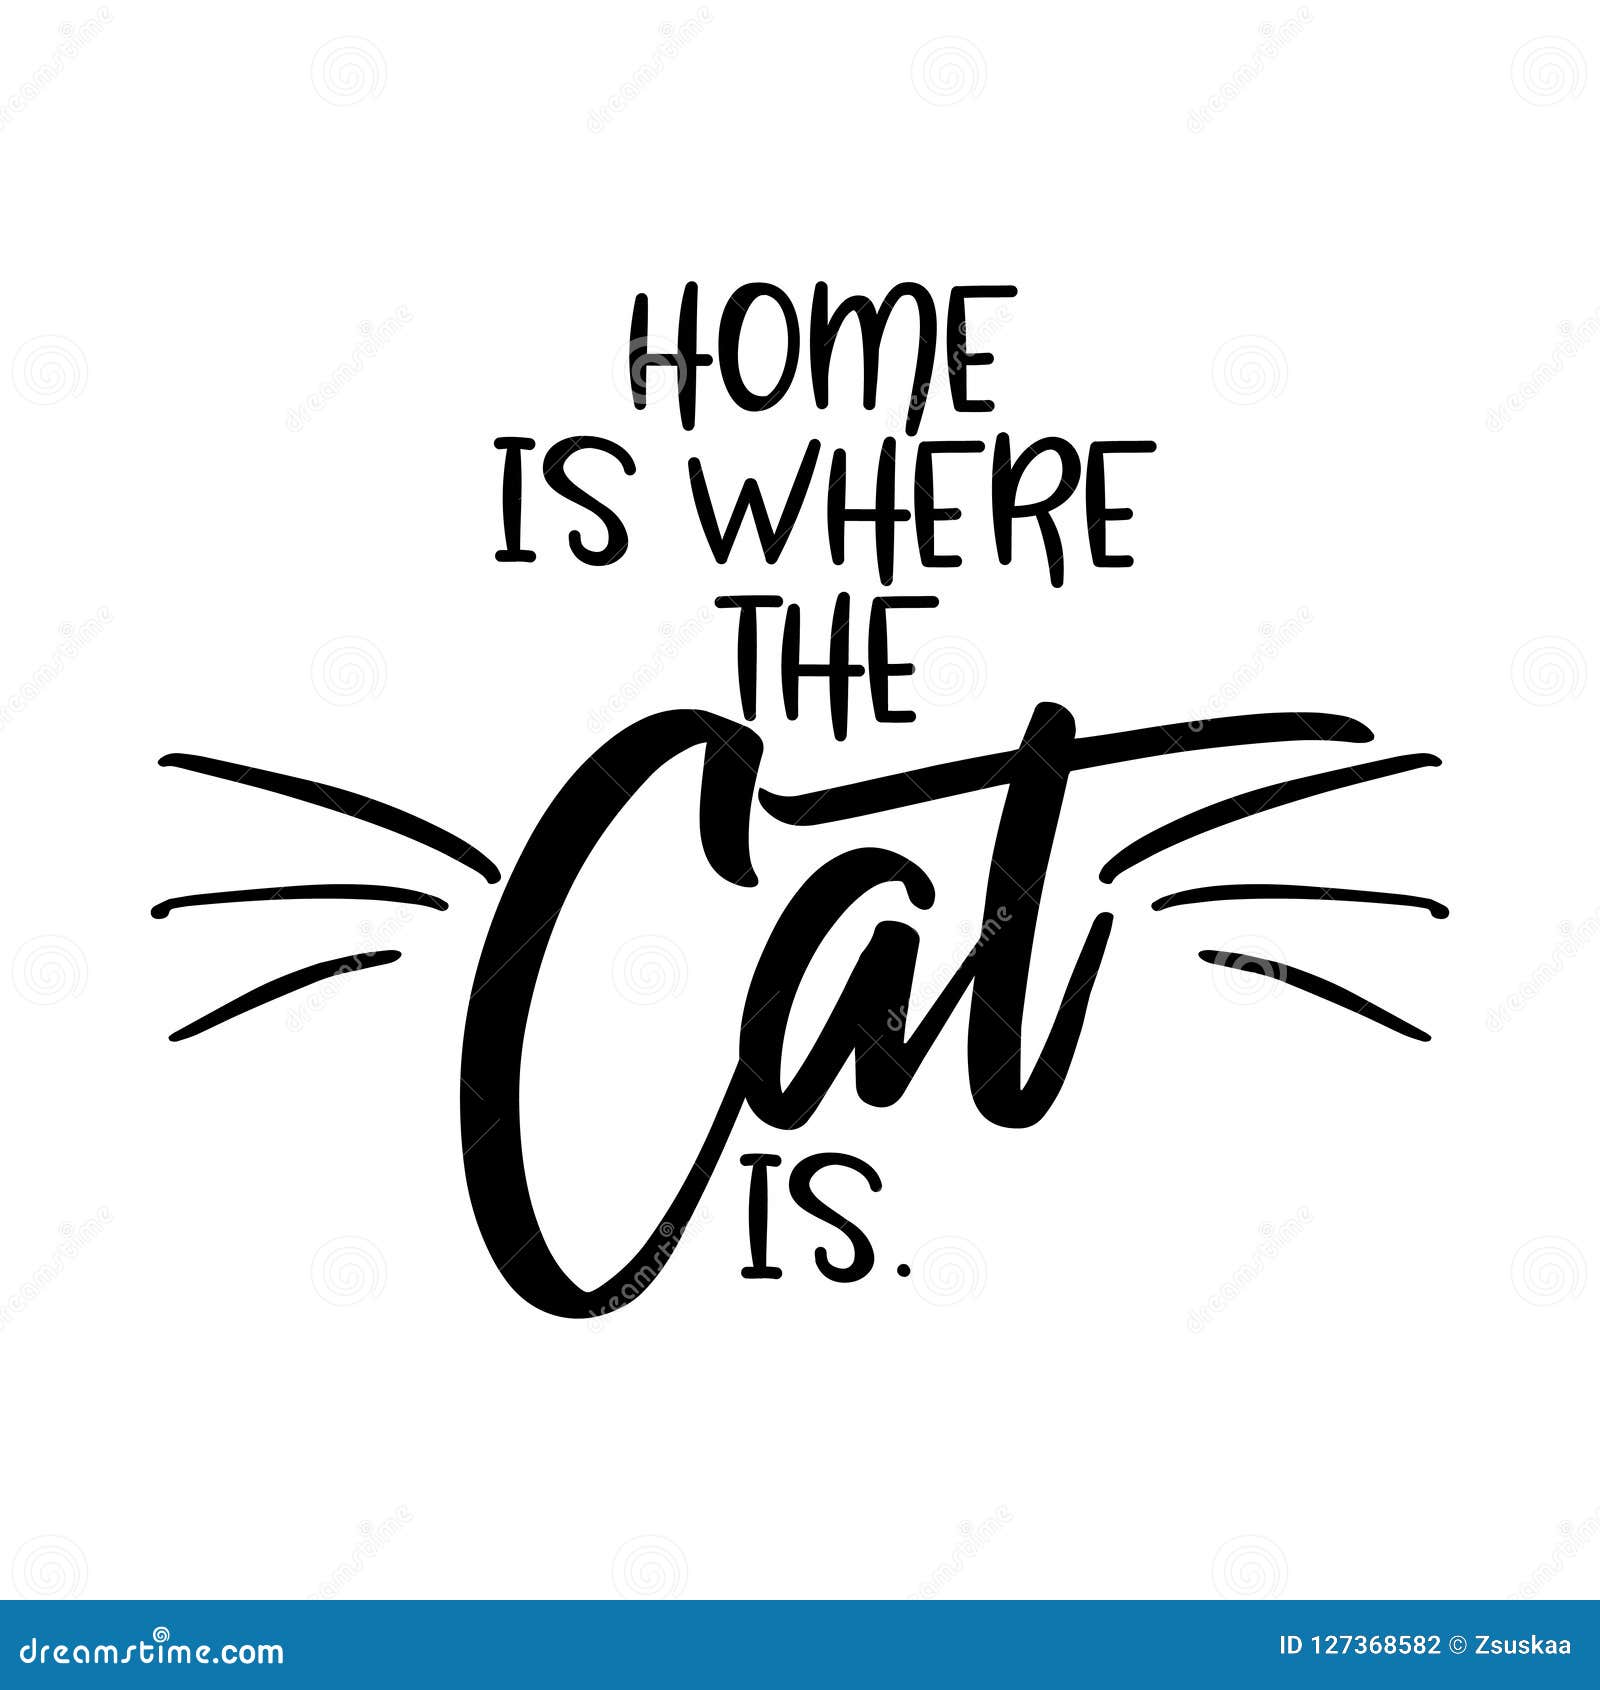 home is where the cat is.